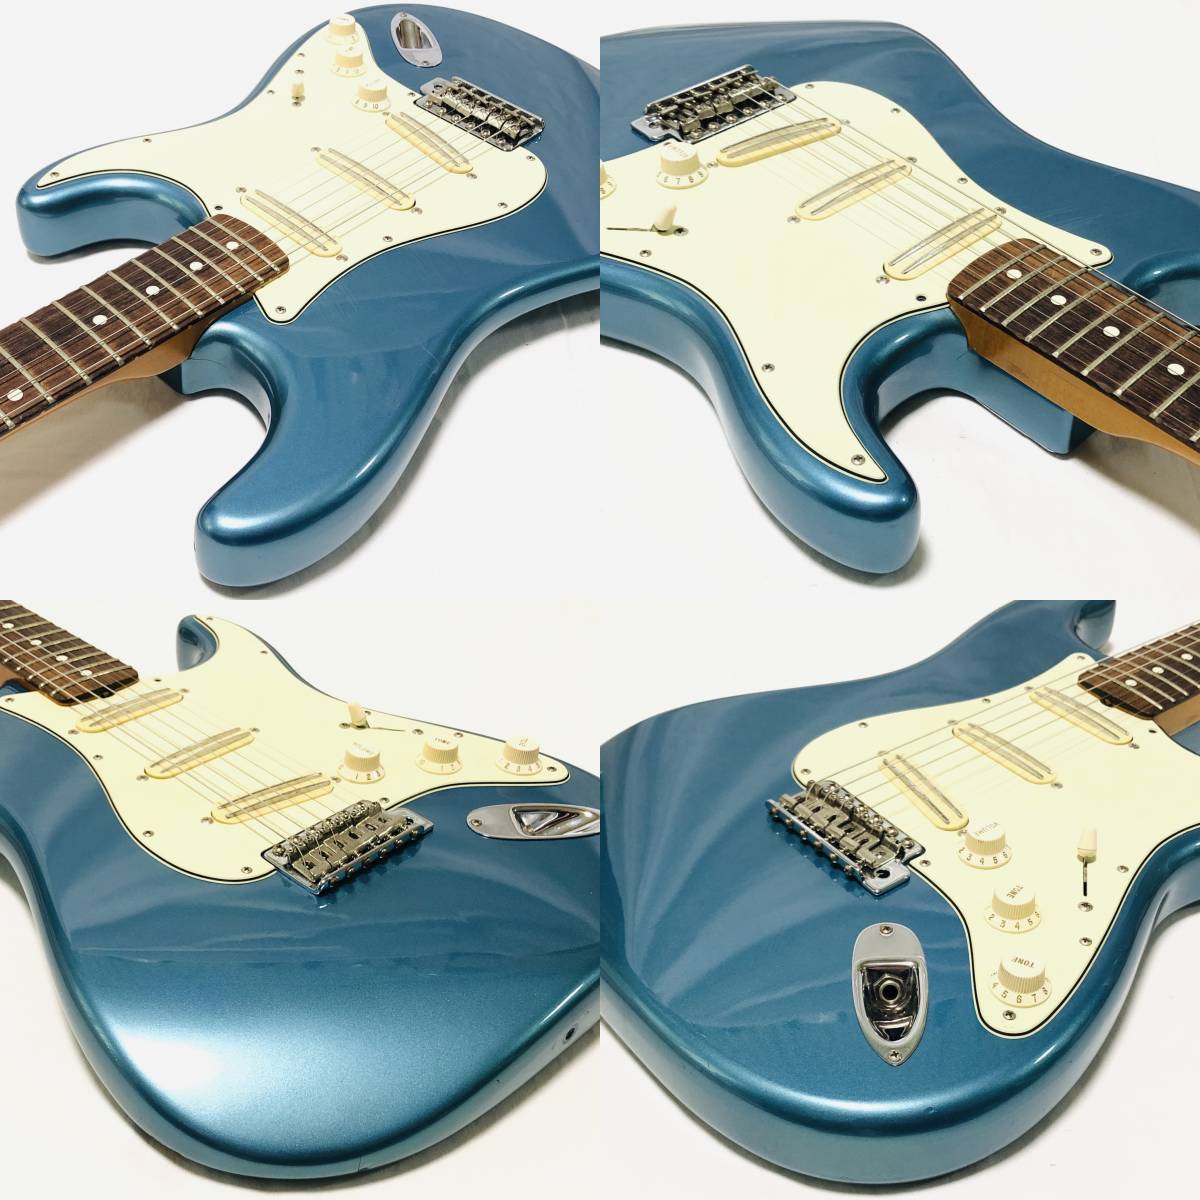 Fender Stratocaster Classic 60s Made in Mexico フェンダー ストラトキャスター クラシック メキシコ _画像5